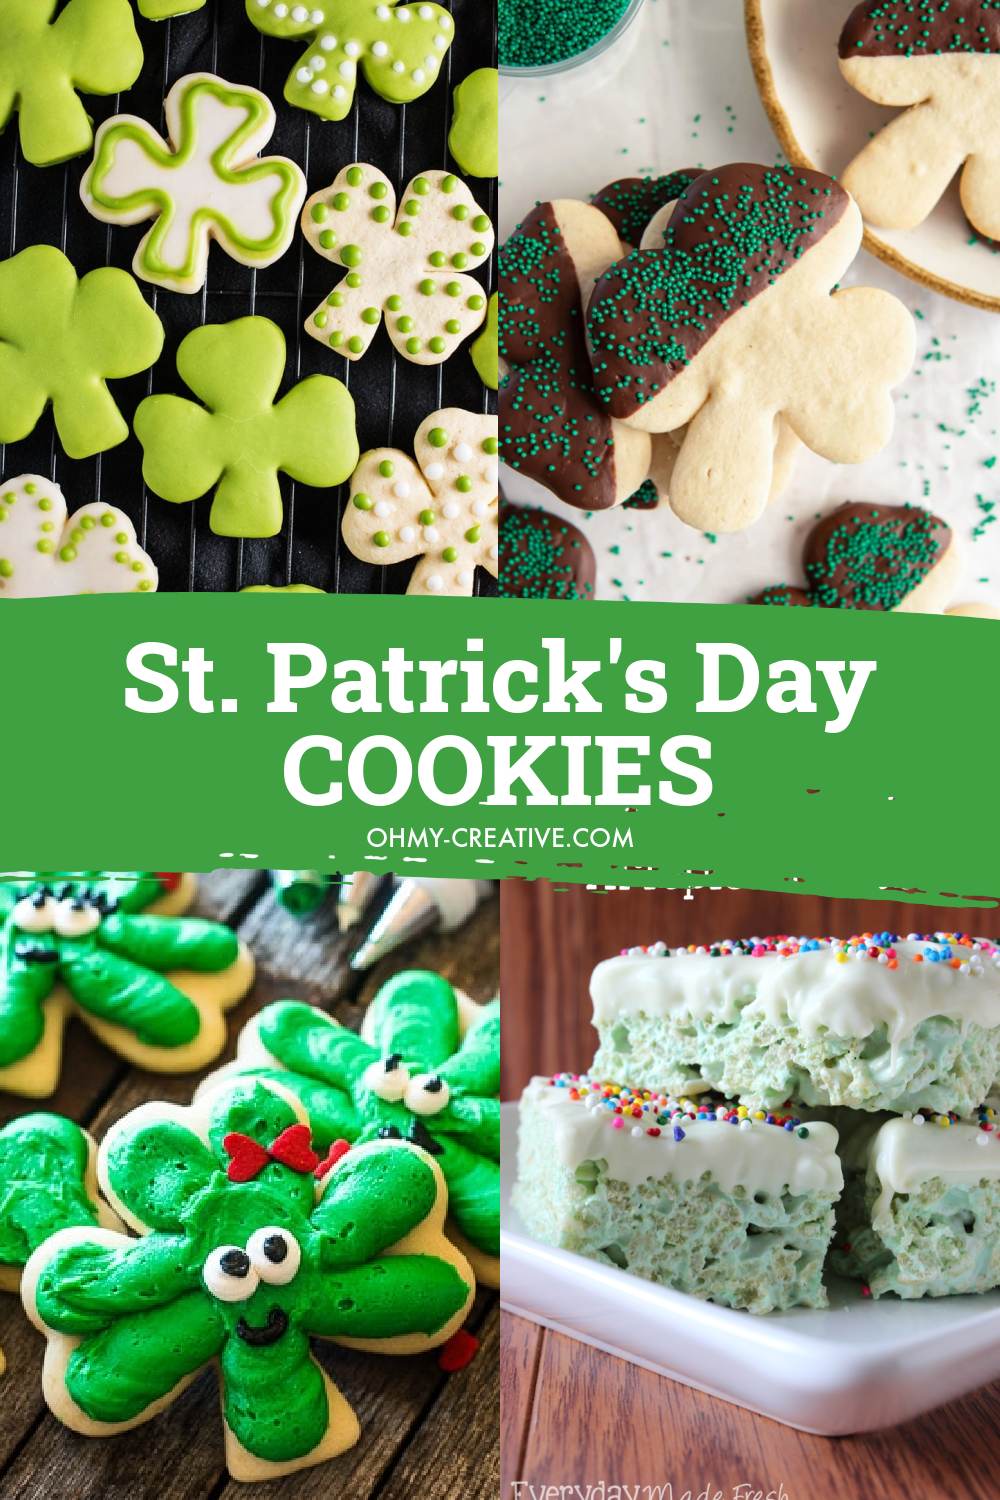 A collage of St. Patrick's Day cookies including Shamrock cut out cookies, shamrock cookies and shamrock shaped cookies cookies.